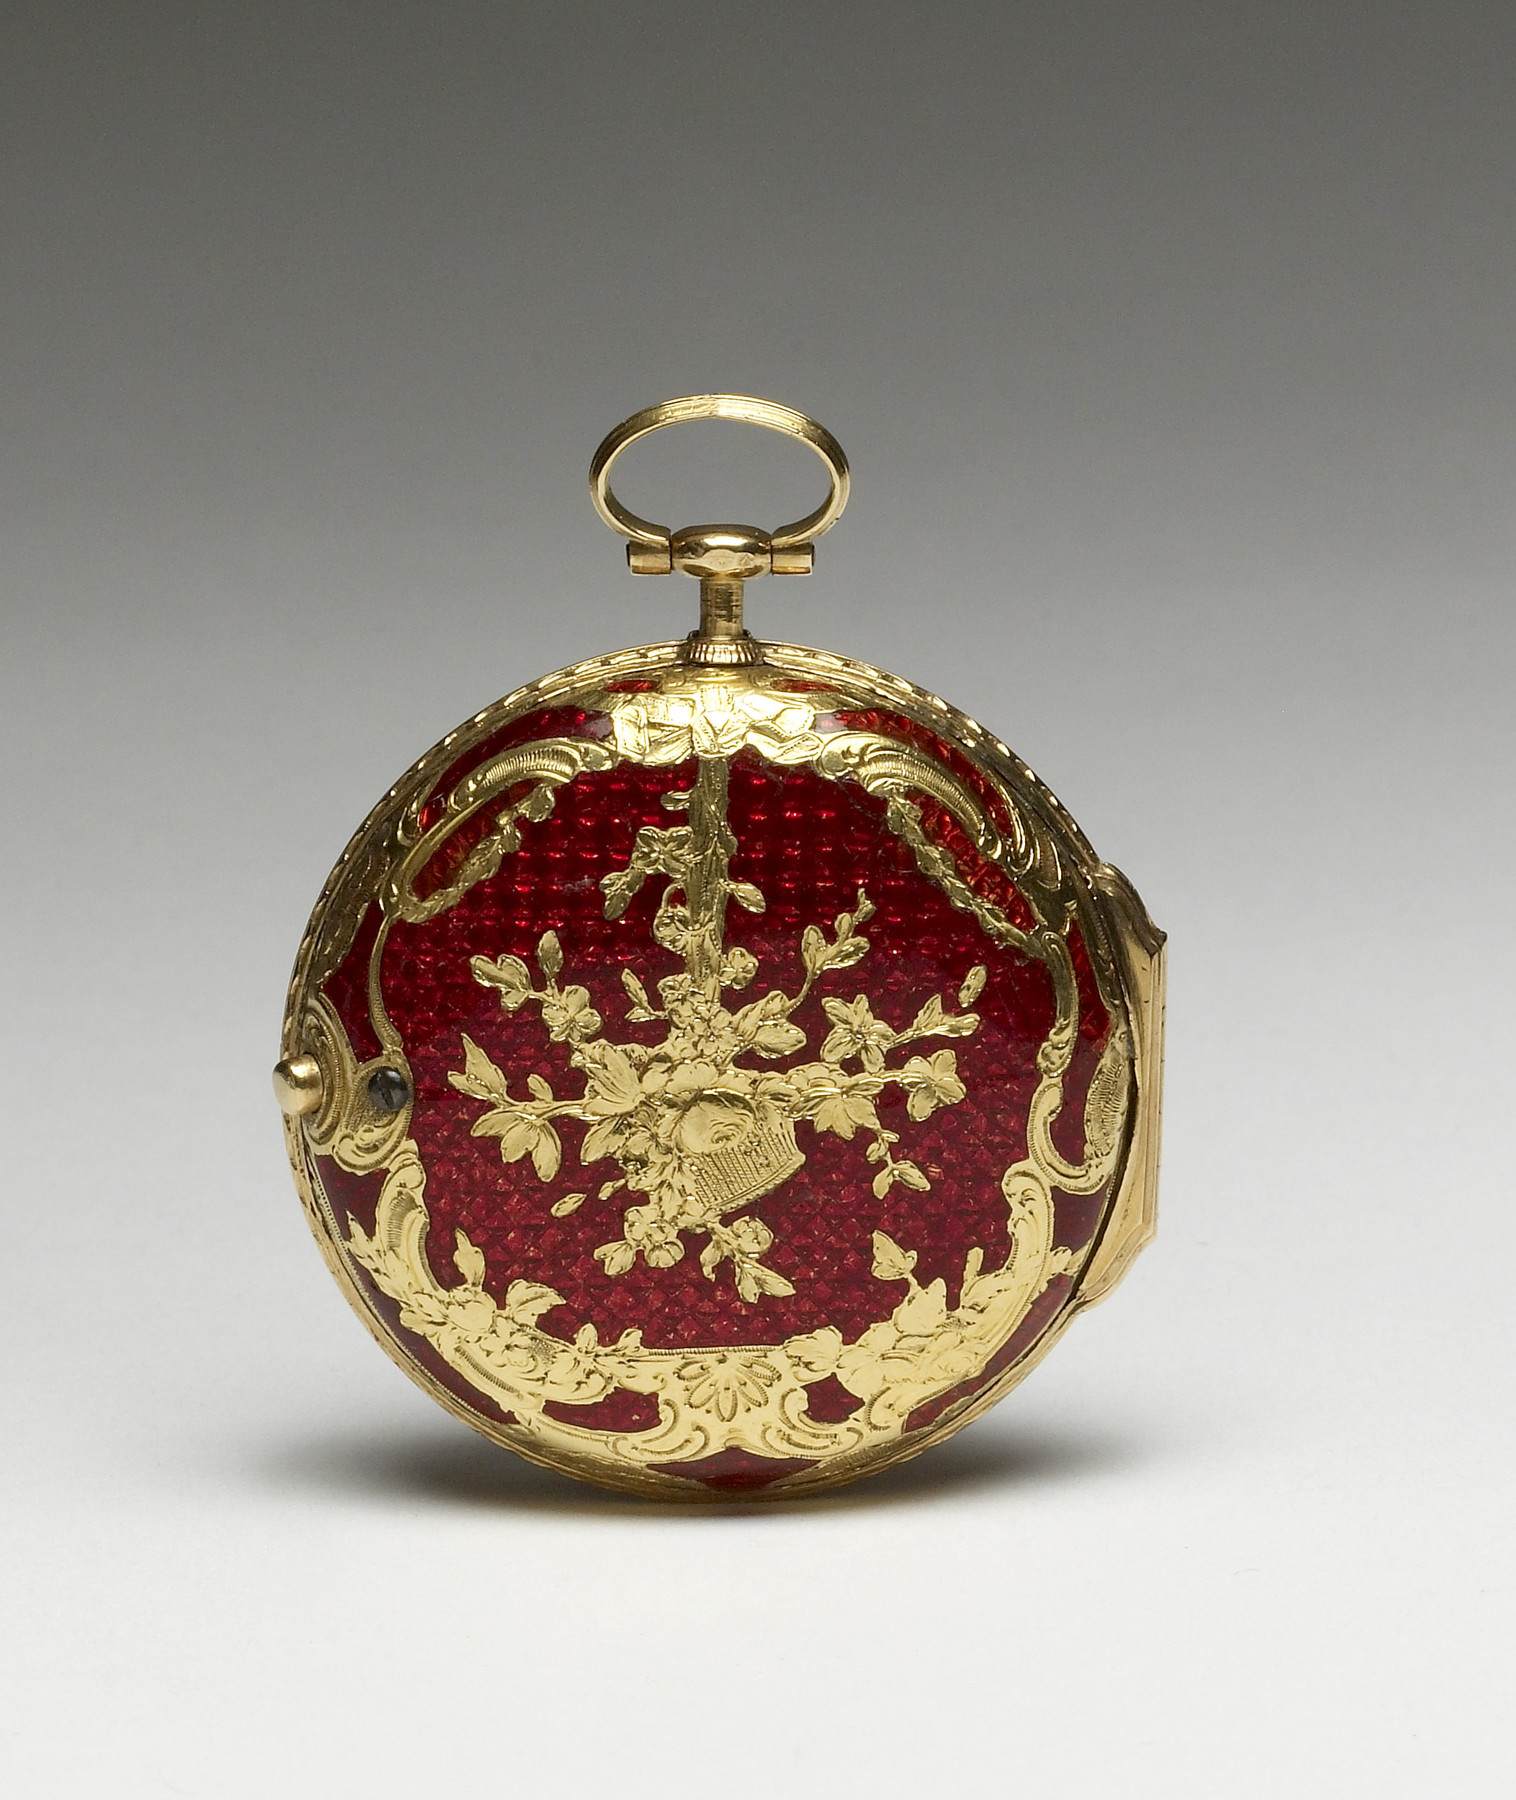 Watch with Case | The Walters Art Museum